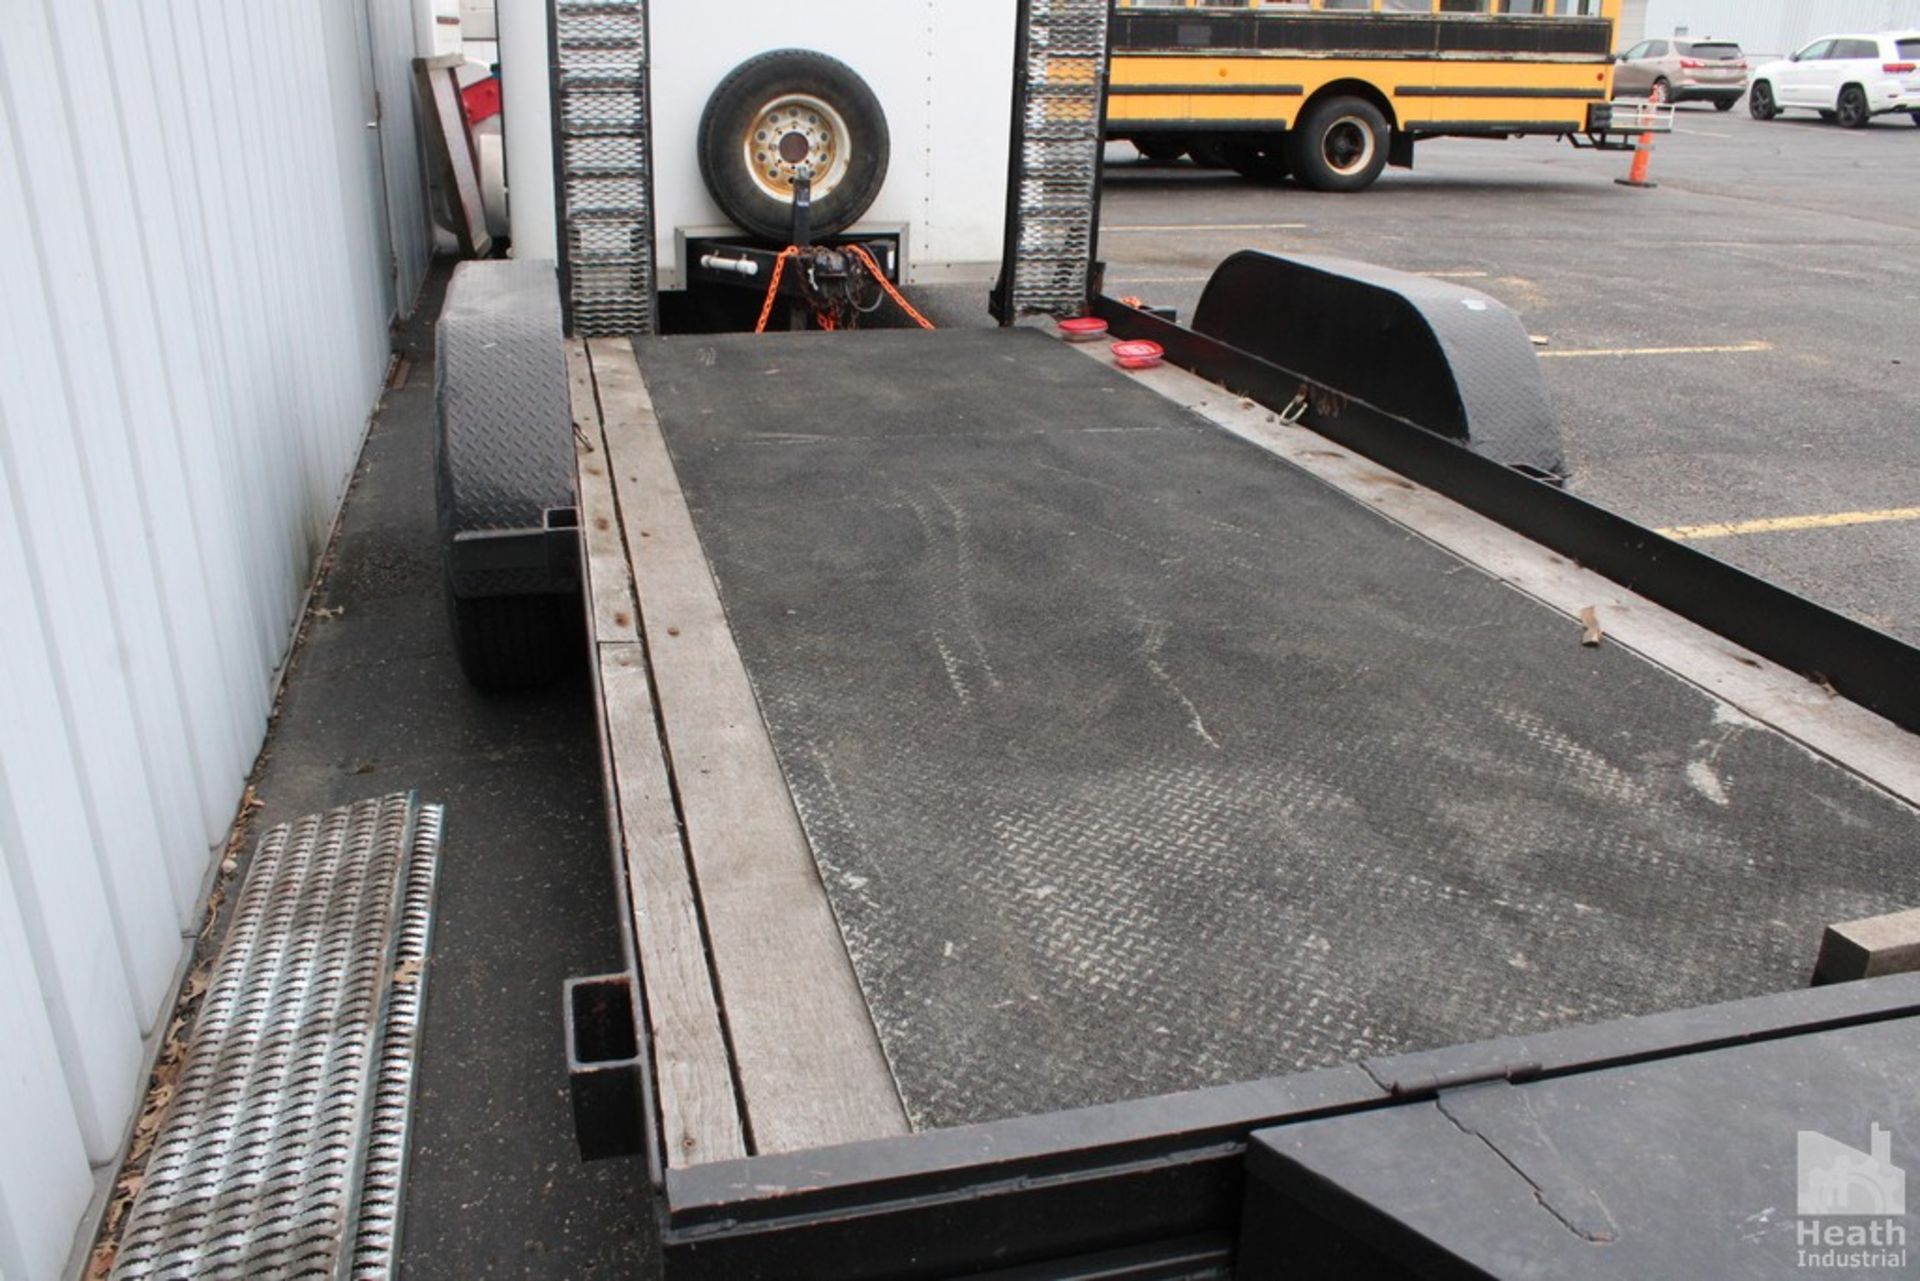 CRONKHITE 8' X 14' WOOD DECK EQUIPMENT TRAILER WITH ALUMINUM DIAMOND PLATE | DROP DOWN RAMPS | - Image 3 of 4